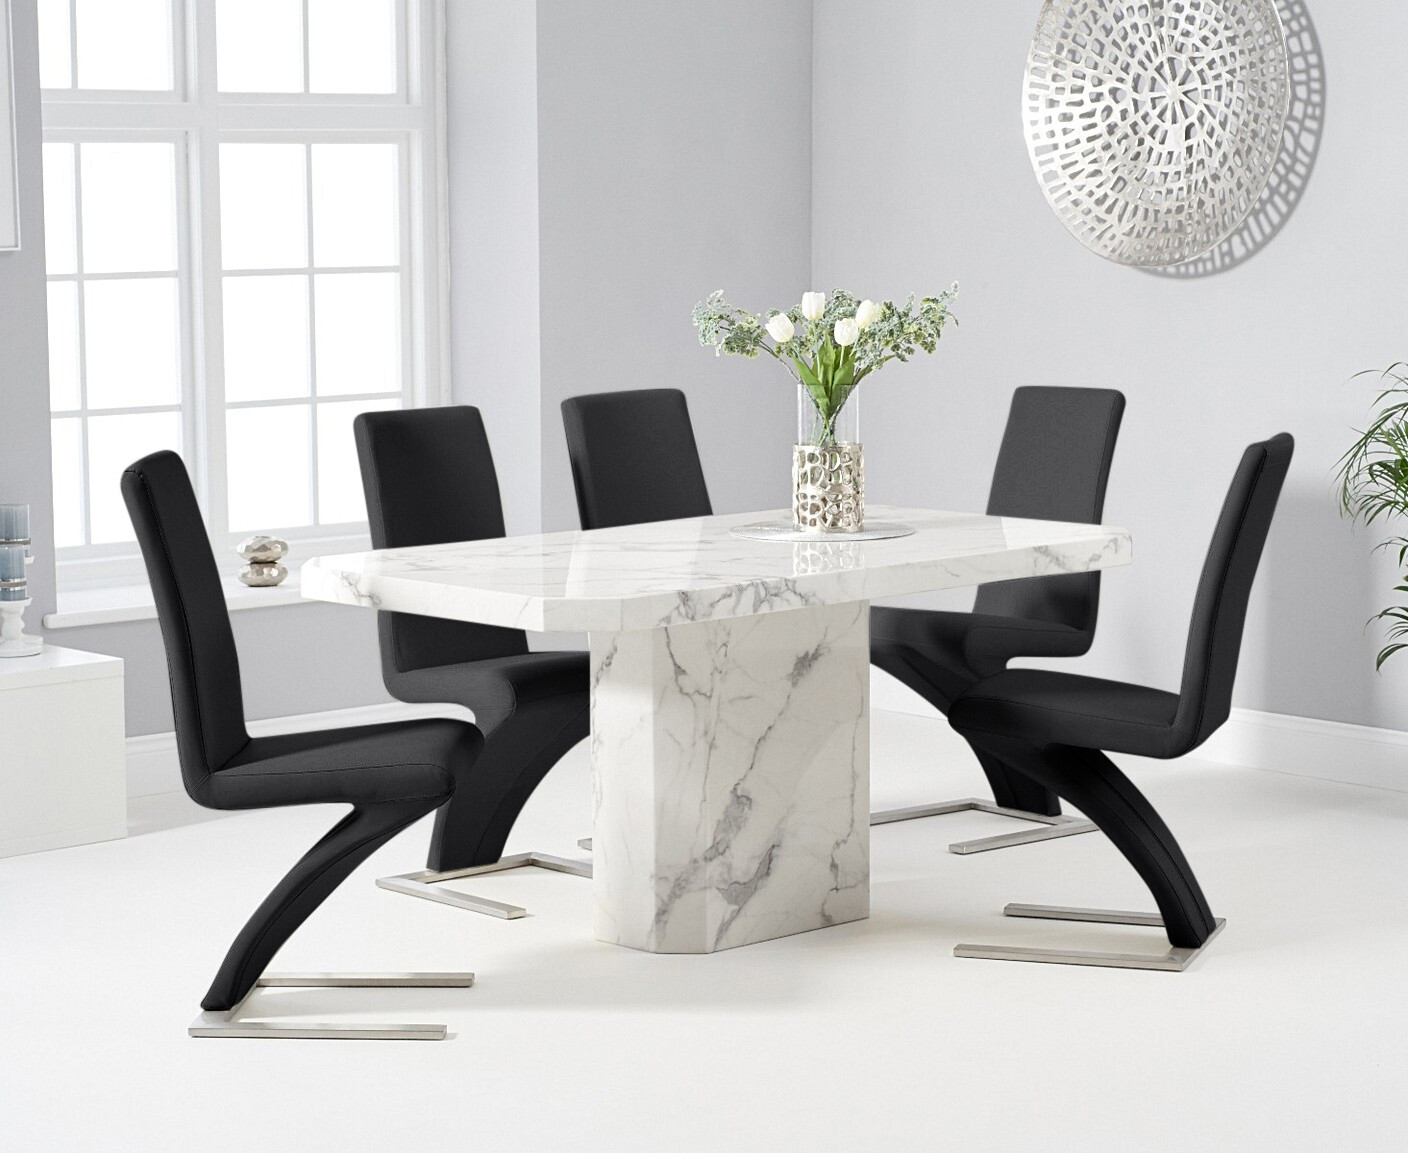 Belle 160cm White Marble Dining Table With 4 Black Aldo Chairs